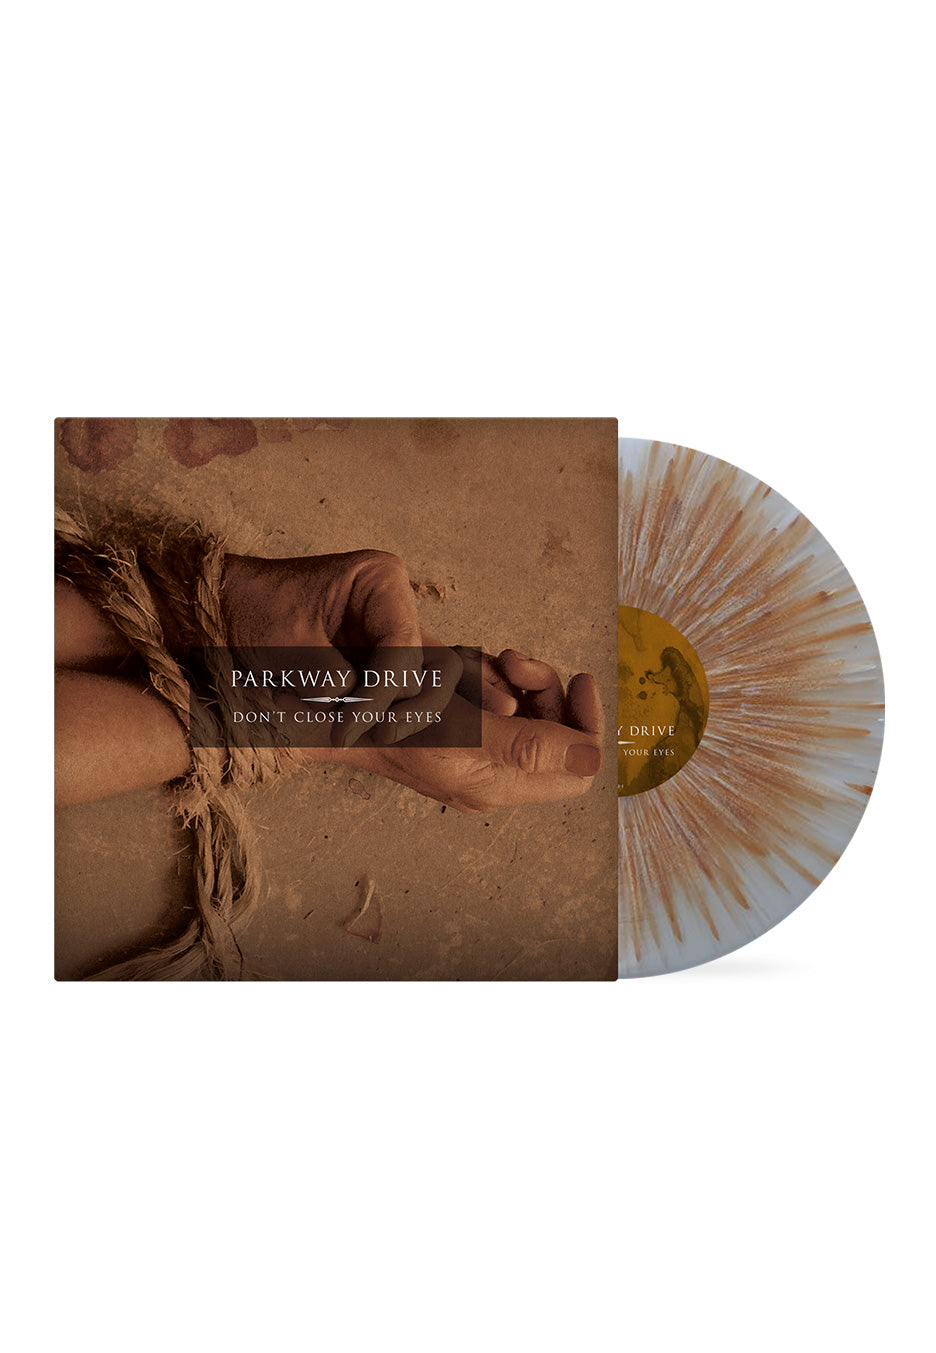 Parkway Drive - Don't Close Your Eyes Clear w/ White & Brown - Splattered Vinyl